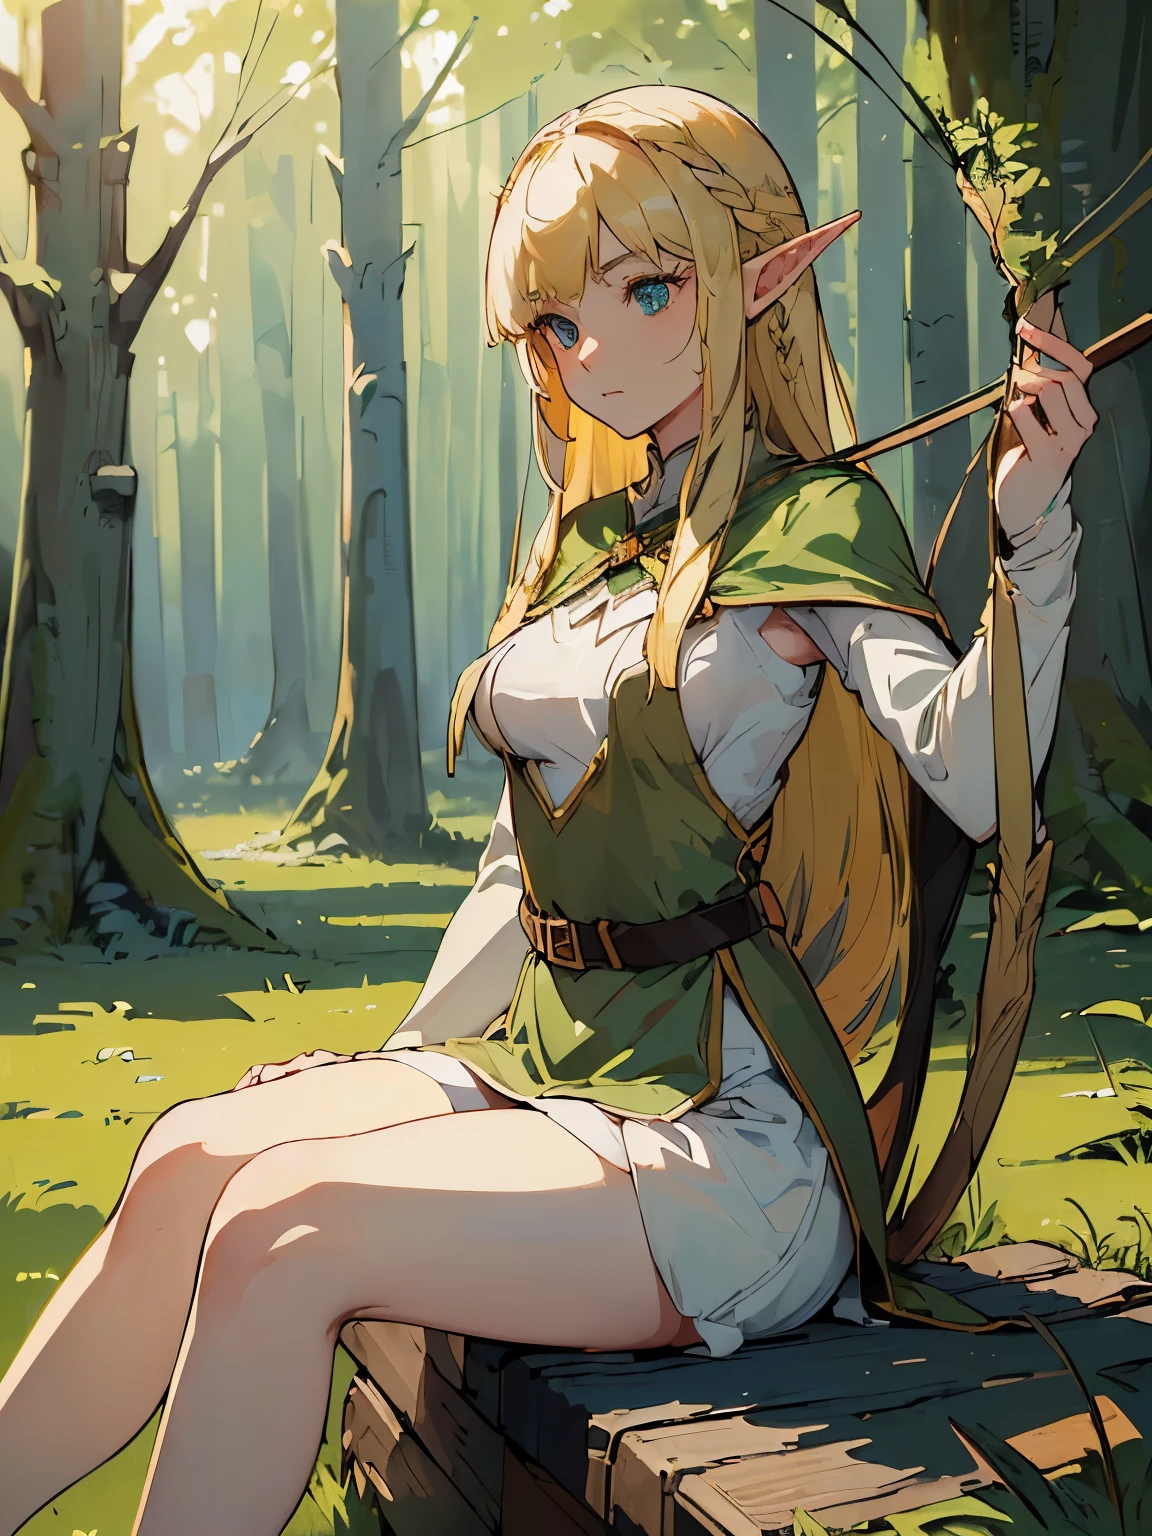 (((masterpiece))) ((( background =  thick forest : at night : camp : detail ))) (((character = young elf female : elegant long blonde hair with straight bang : small breast : fit body : archer outfit : sitting on the ground : relaxing )))